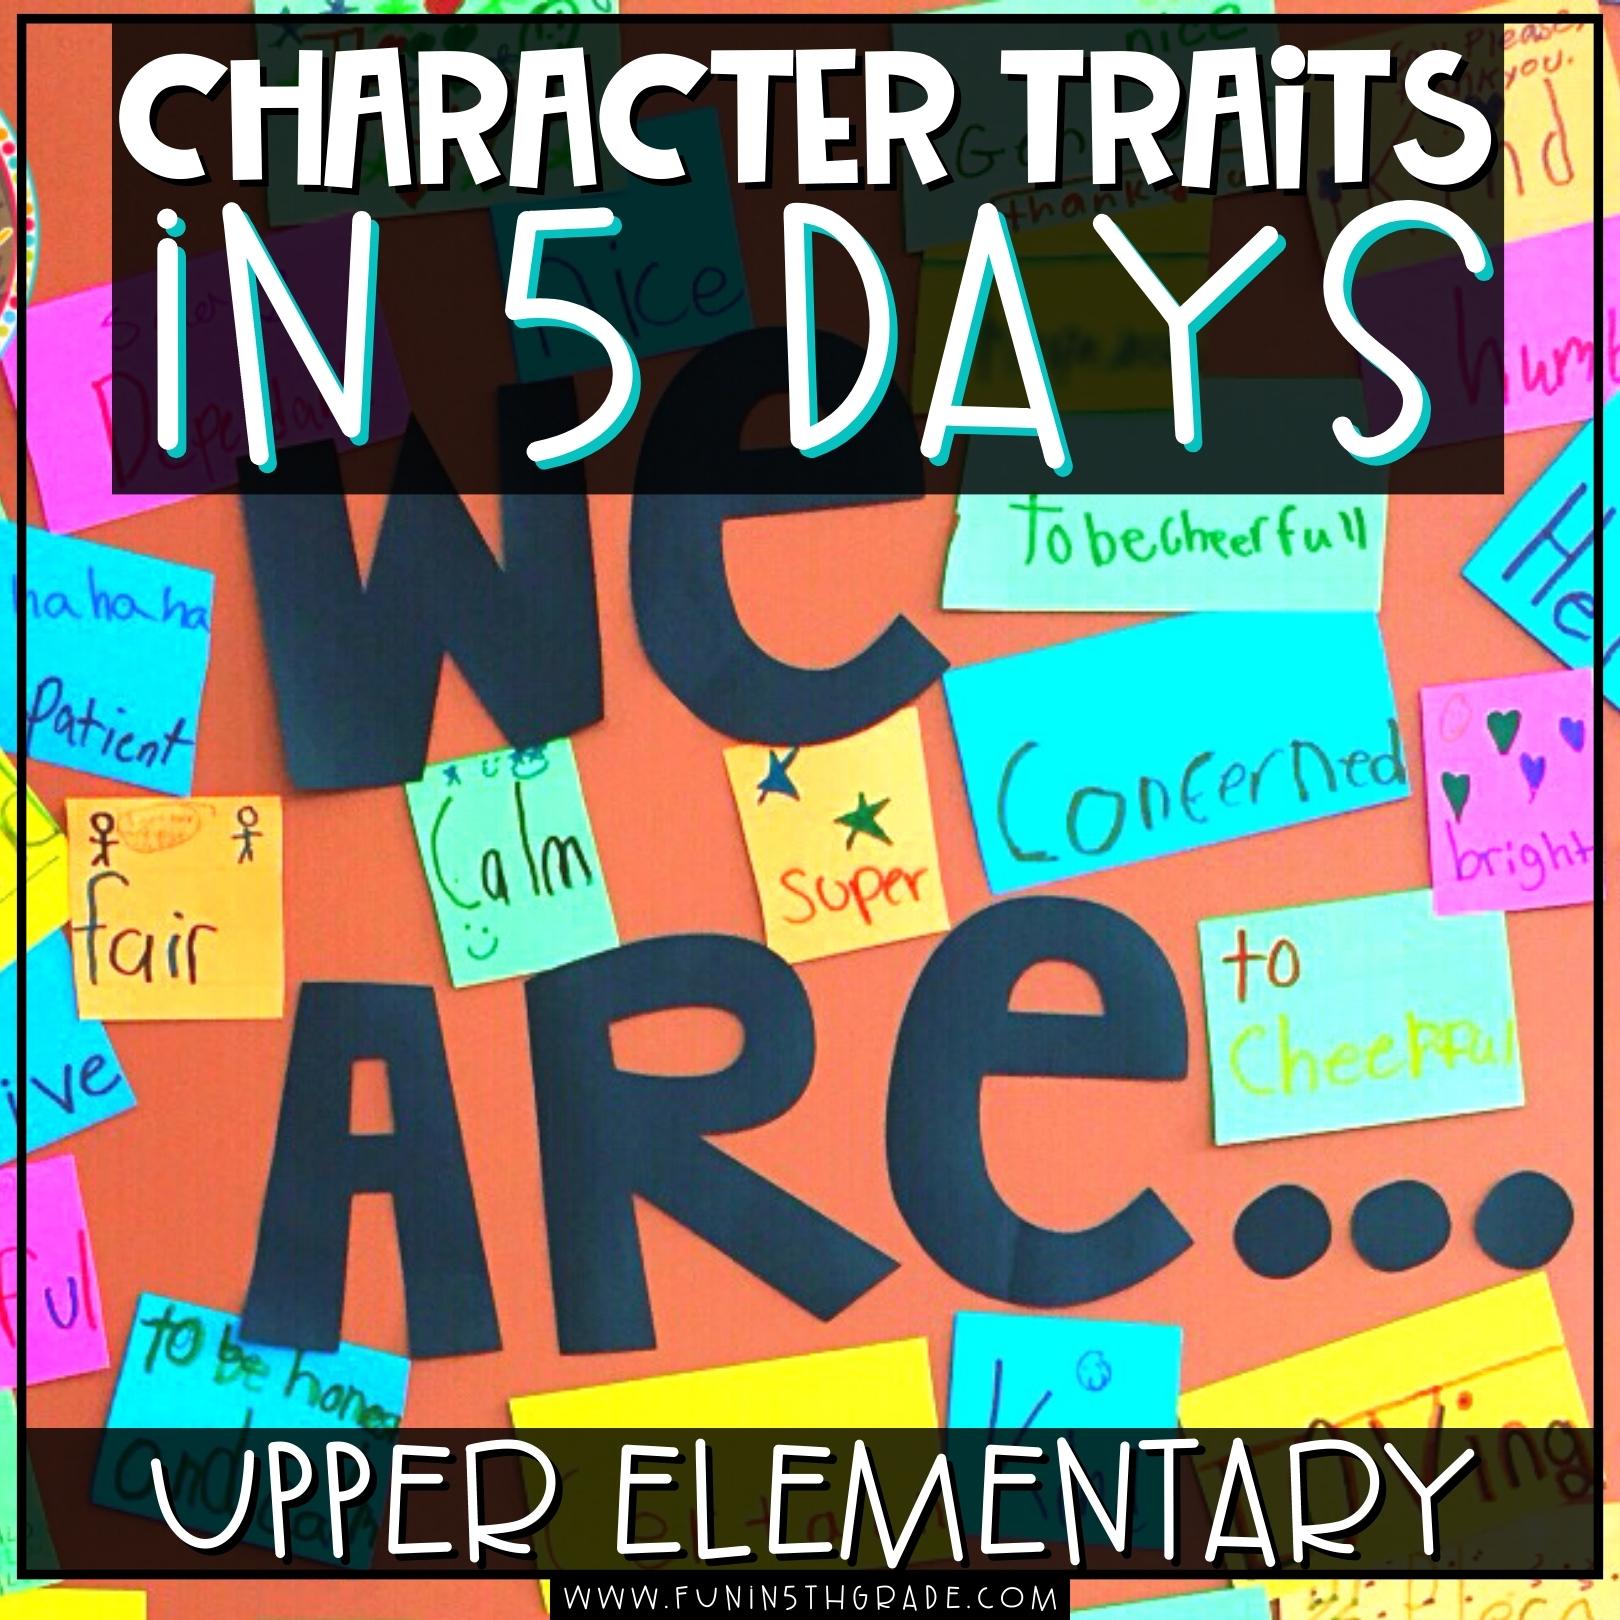 Introducing Character Traits in 5 days